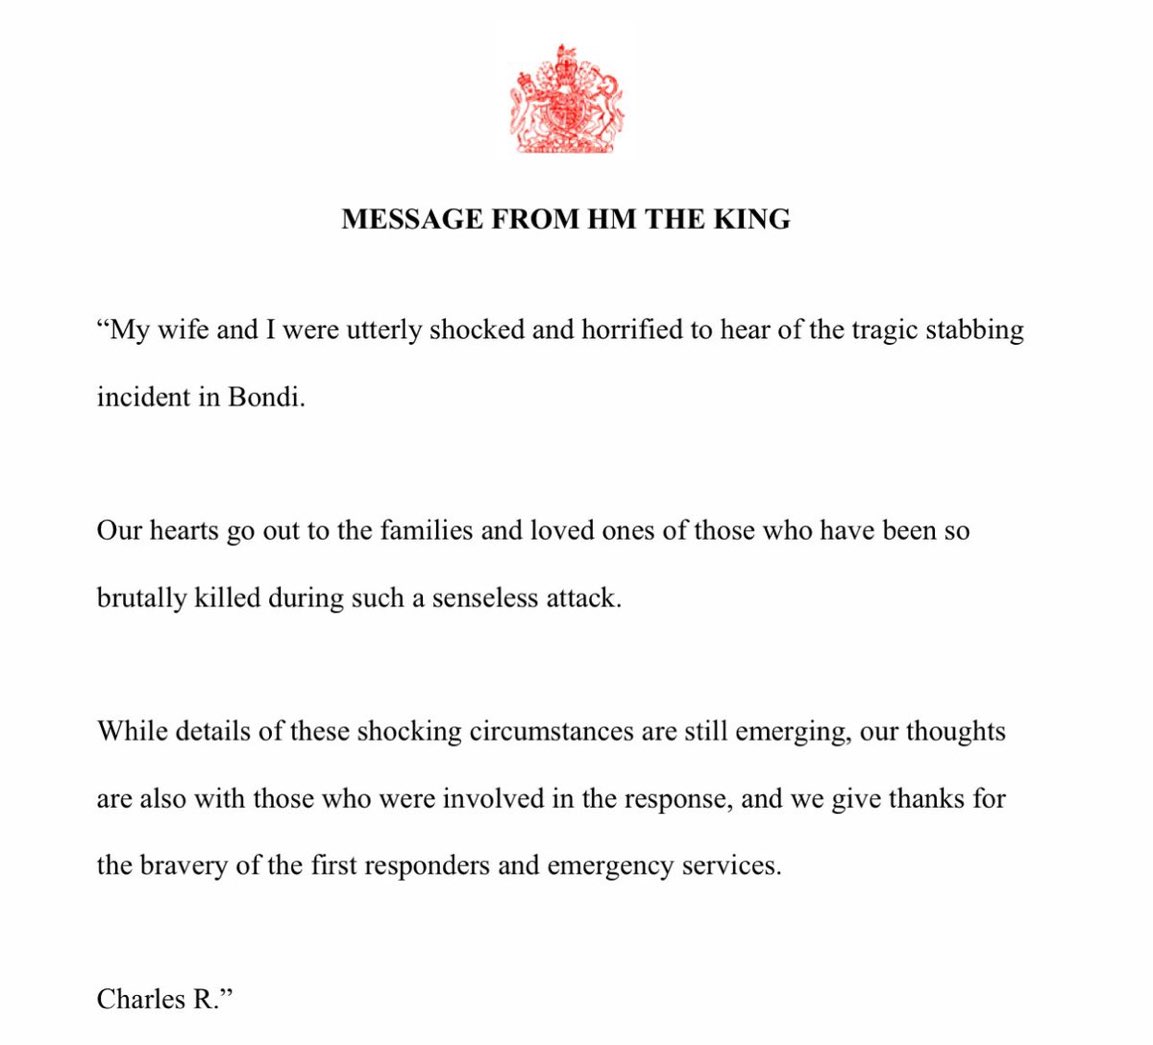 King Charles and Queen Camilla send a message regarding the attack at Bondi. ❤️❤️❤️